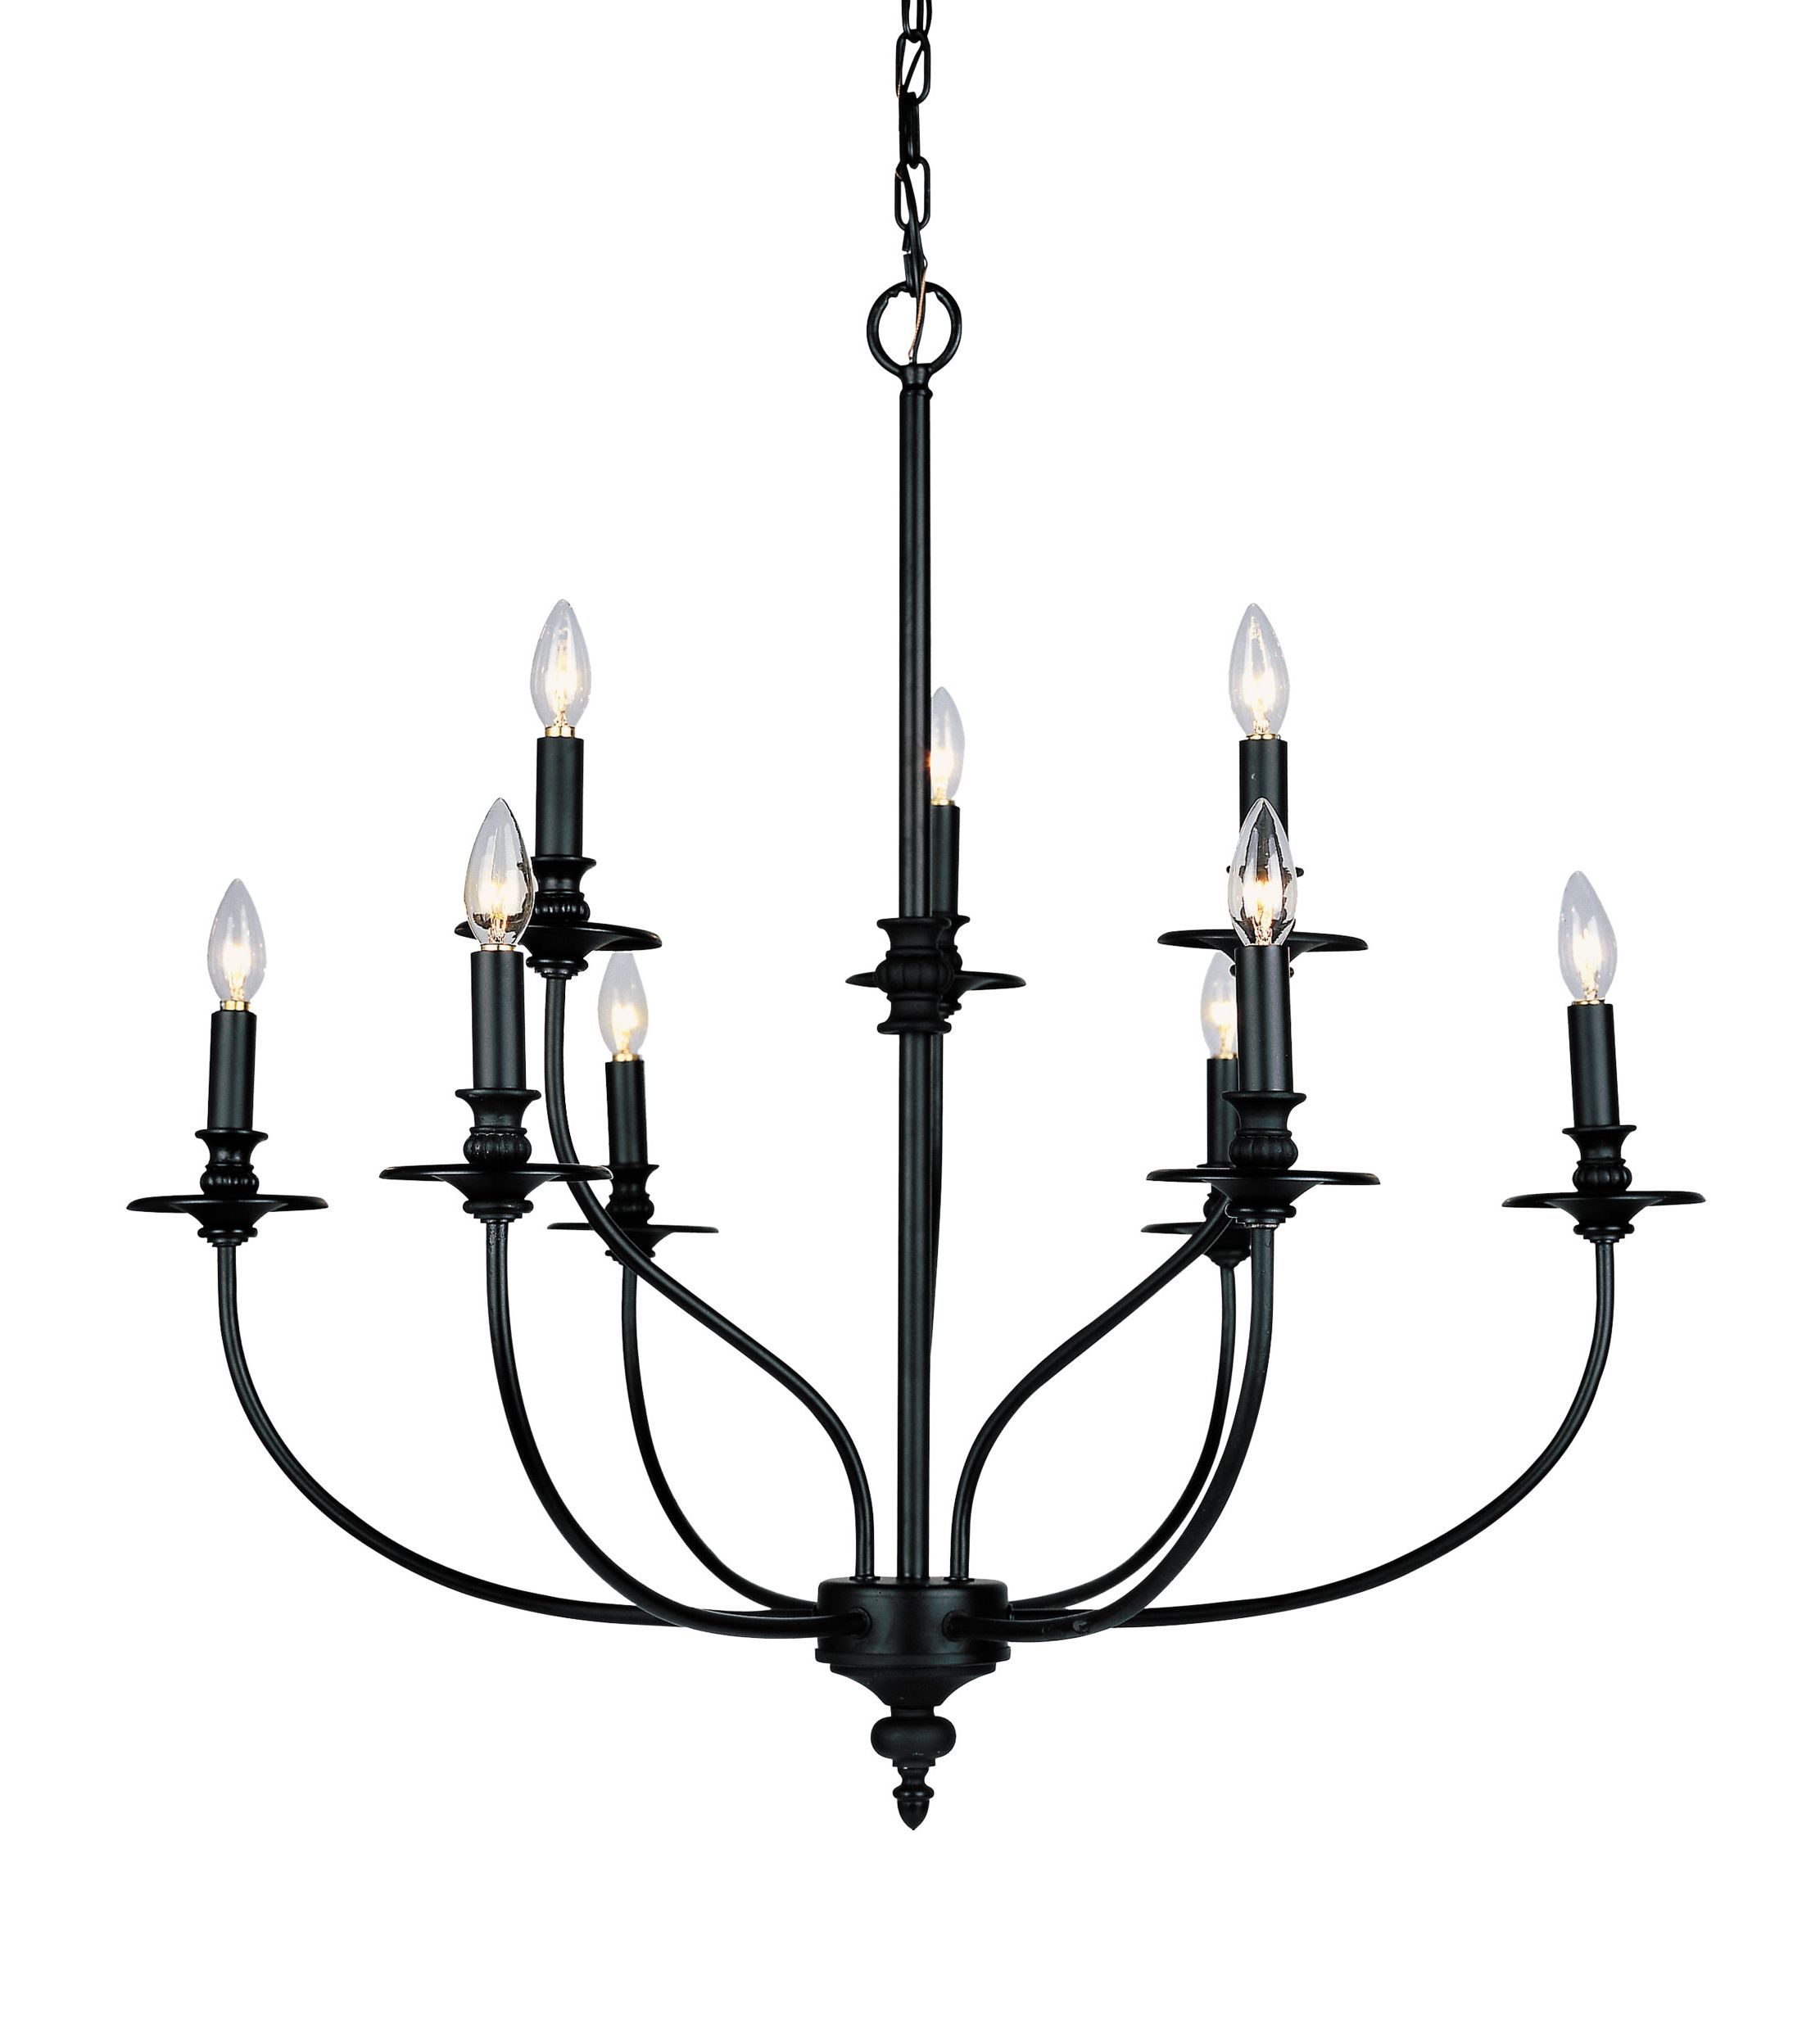 Newest Giverny 9 Light Candle Style Chandelier Throughout Kenedy 9 Light Candle Style Chandeliers (View 6 of 20)